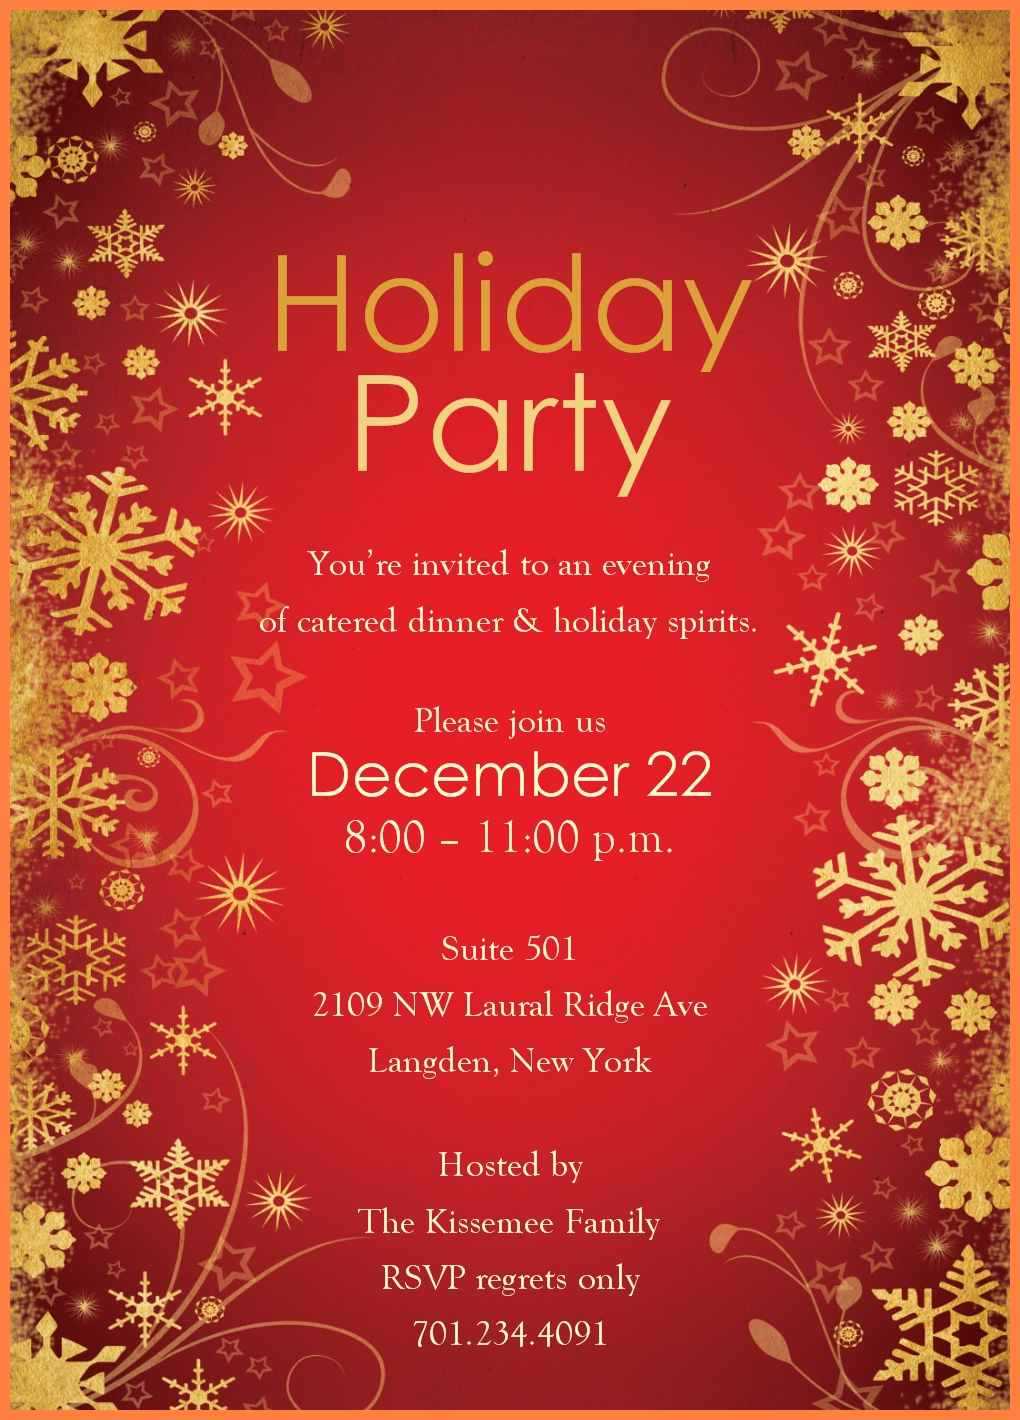 10+ Free Party Templates For Word | Andrew Gunsberg In Free Christmas Invitation Templates For Word